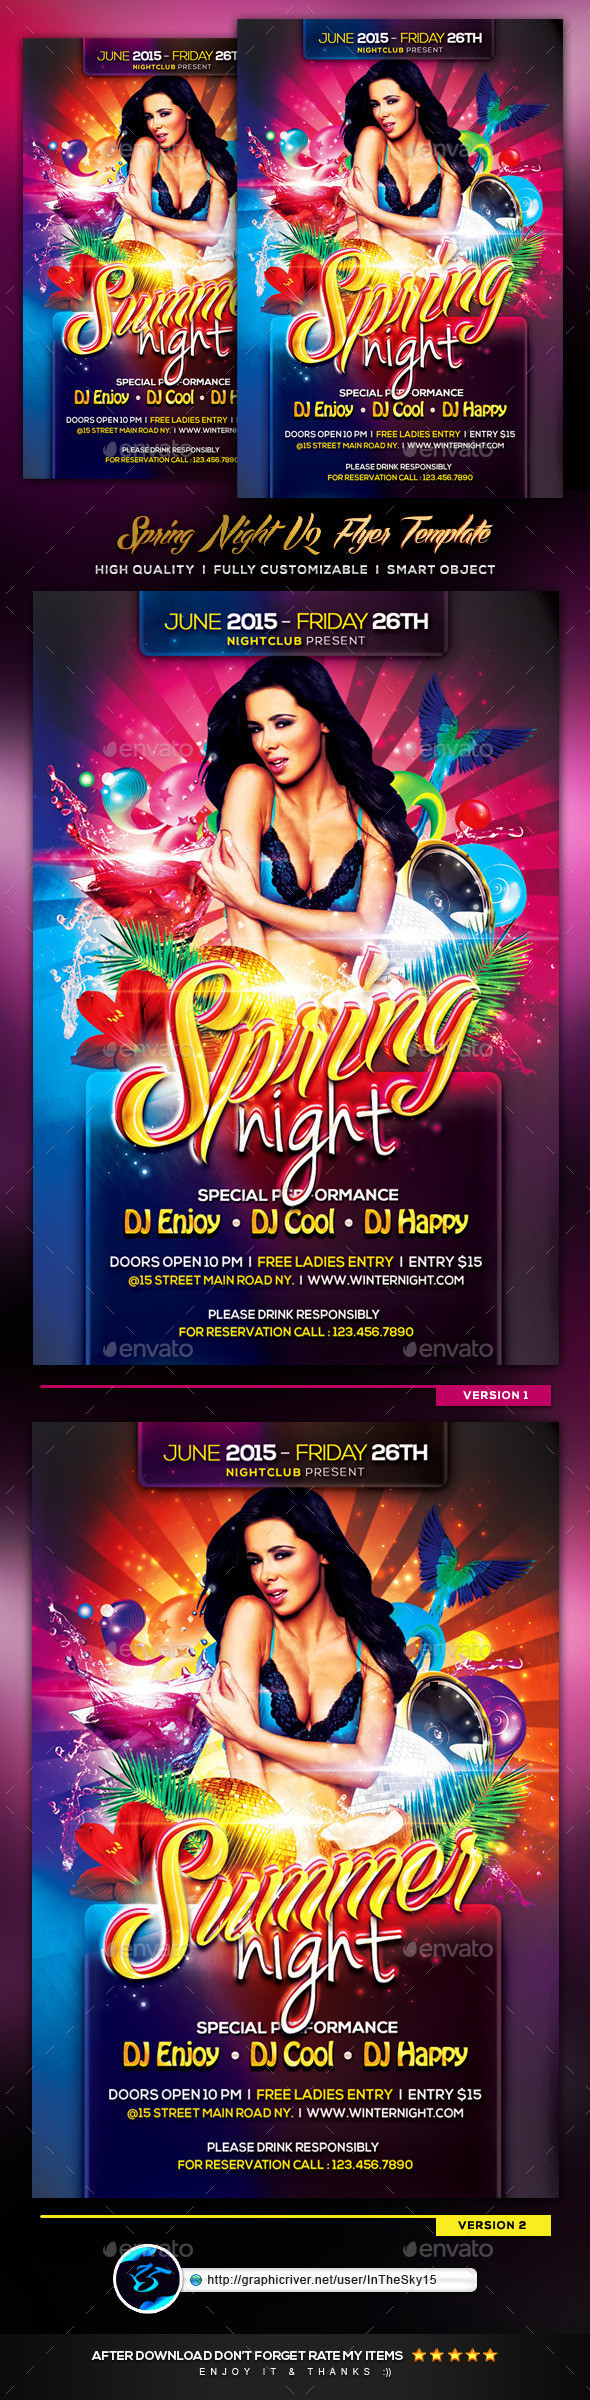 Preview 20spring 20night 20v2 20flyer 20template 20